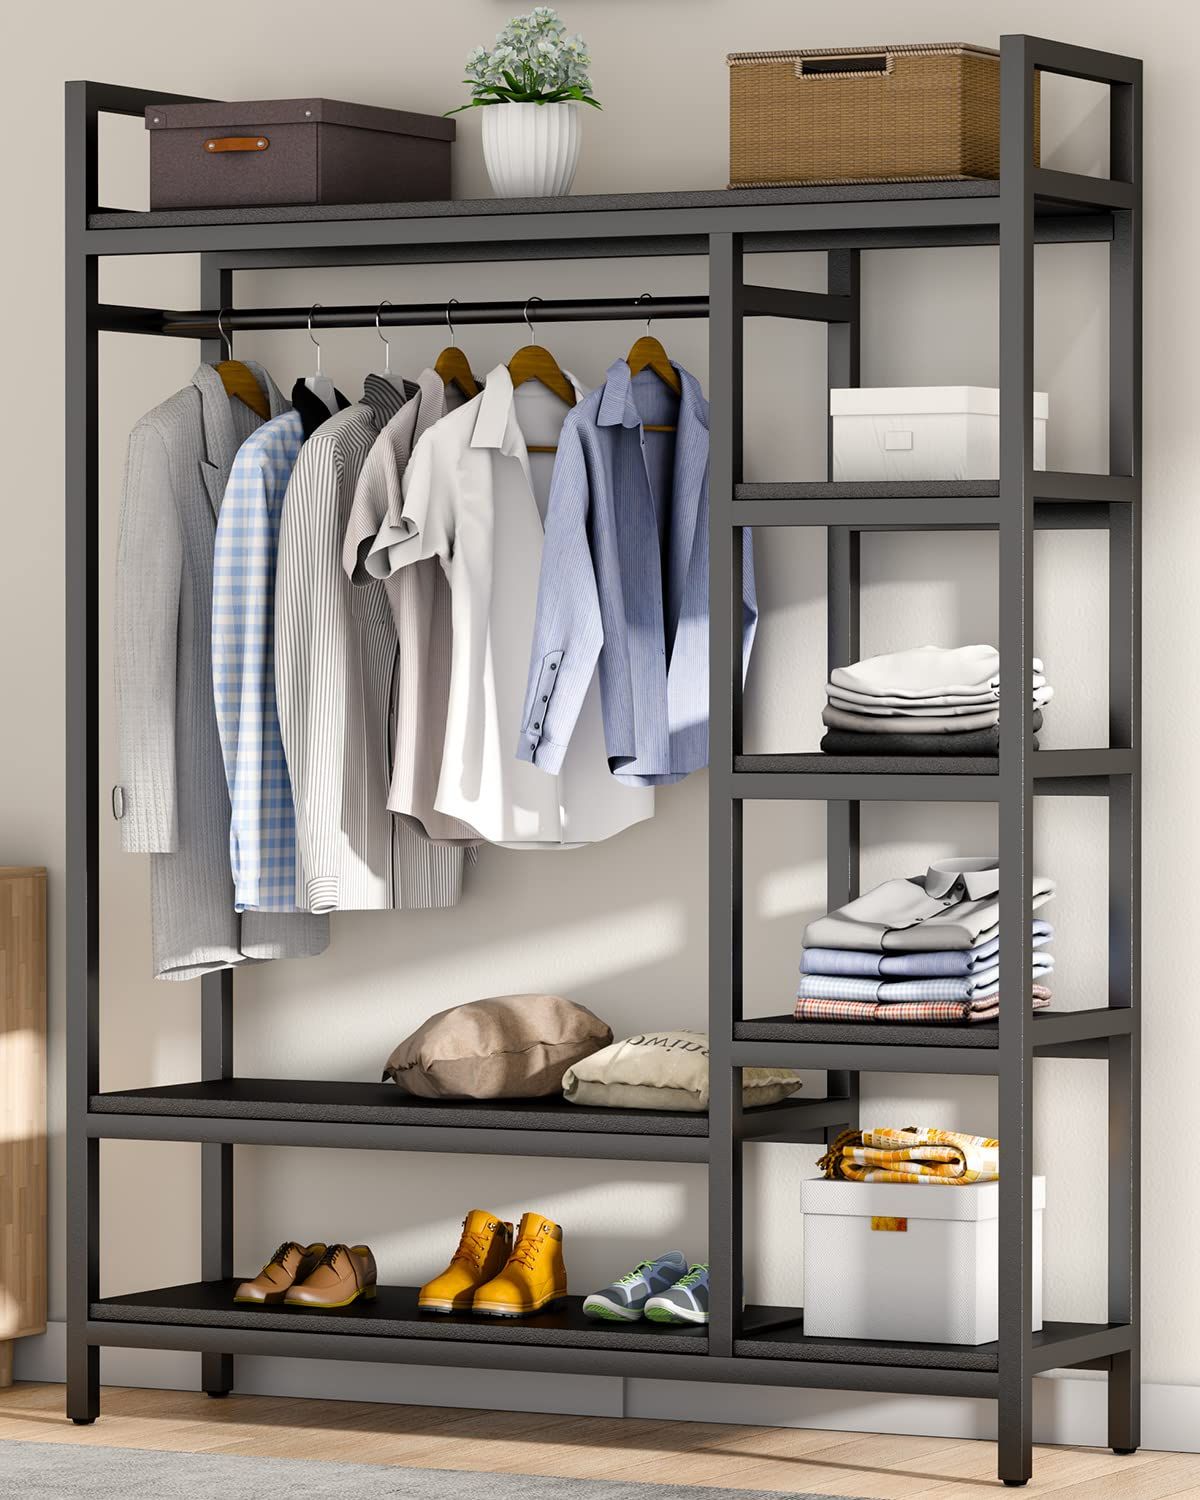 Closet Organizer Wardrobes With Regard To Most Recent Amazon: Hokeeper 600lbs Capacity Free Standing Closet Organizer With 6  Metal Shelves Heavy Duty Clothing Rack For Hanging Clothes Sturdy Storage Wardrobe  Closet Garment Rack For Bedroom : Home & Kitchen (Photo 5 of 10)